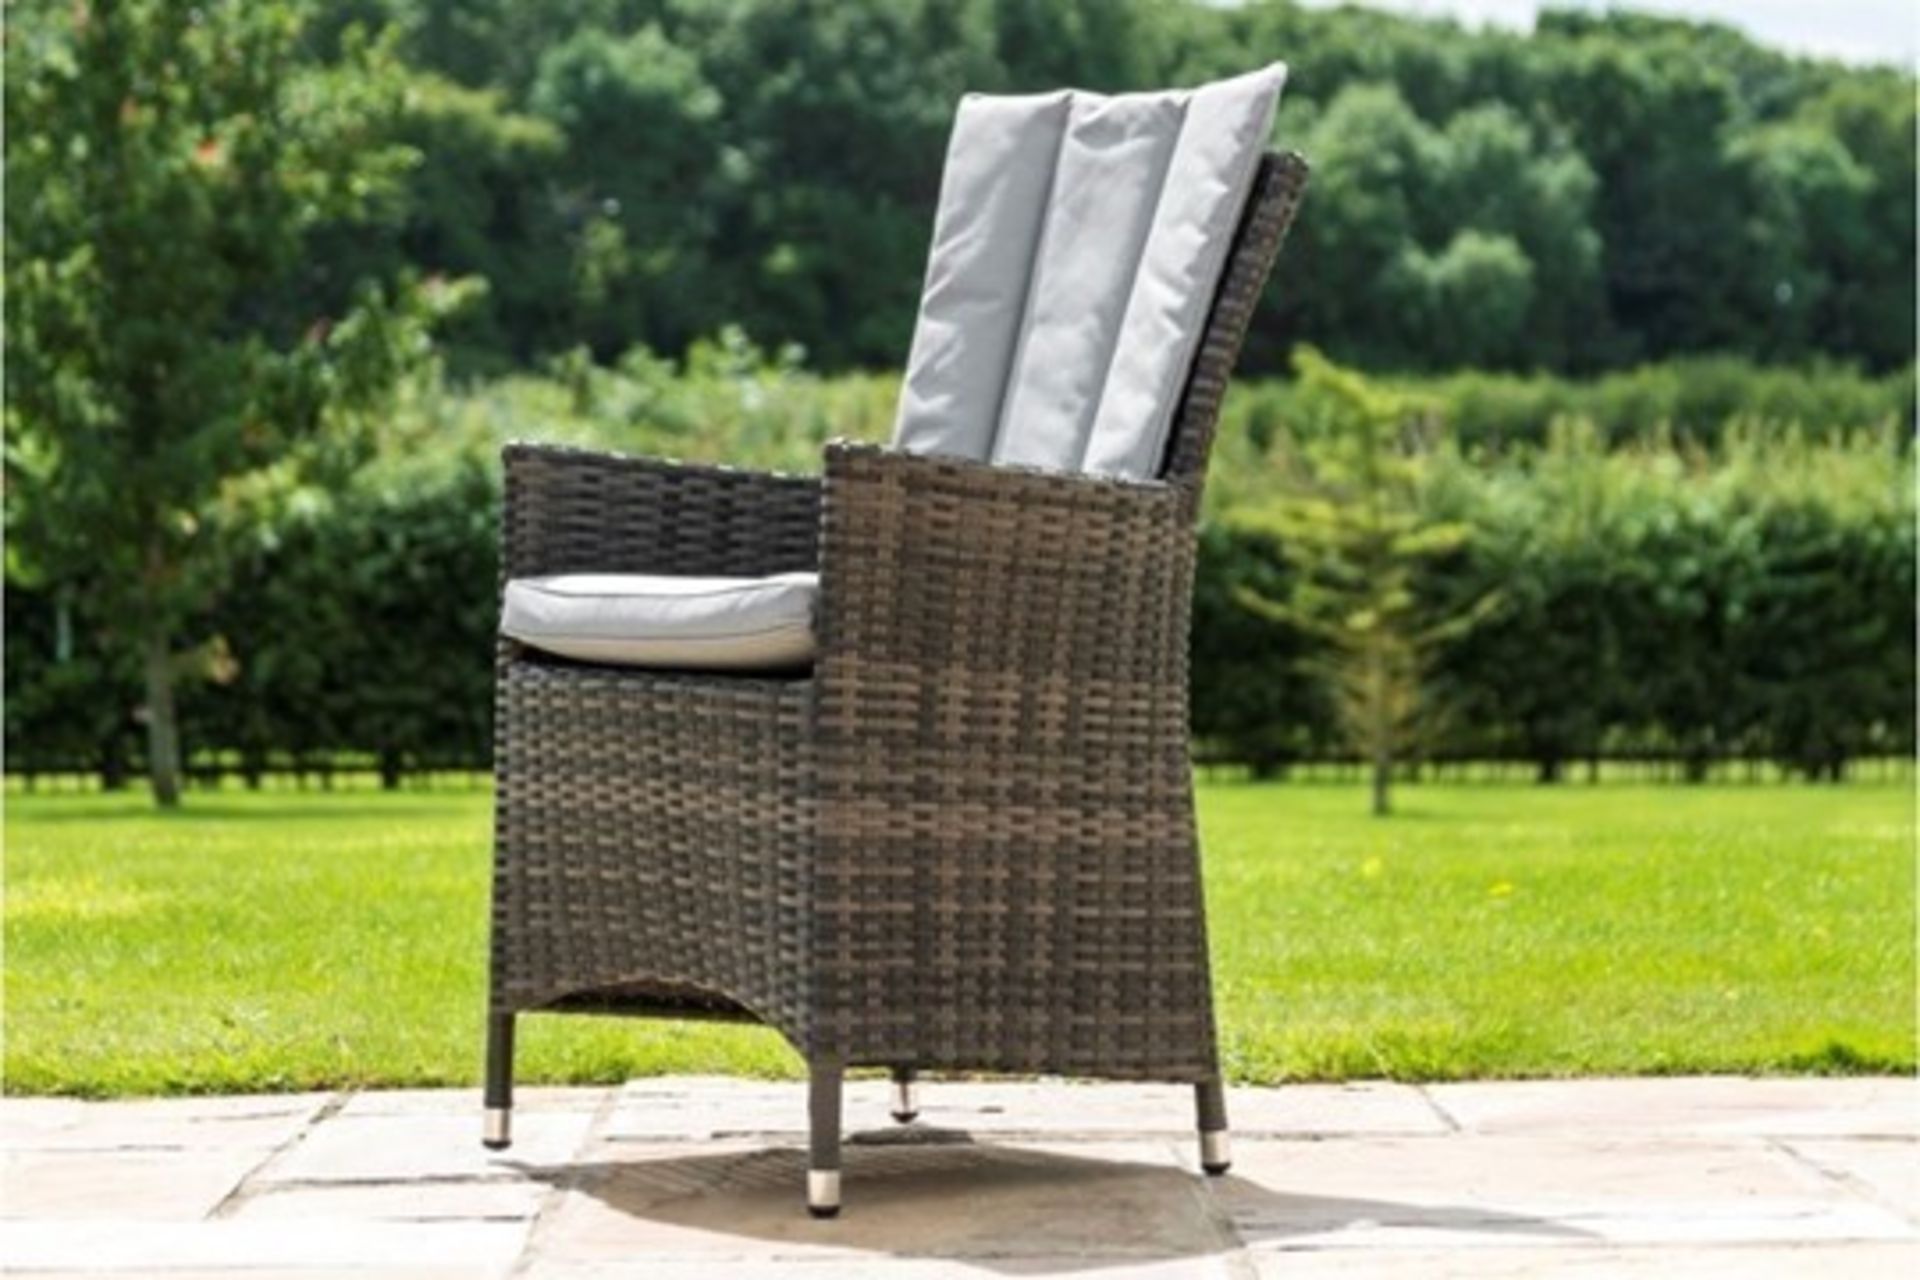 Rattan LA 4 Seat Square Outdoor Dining Set With Parasol (Grey) *BRAND NEW* - Image 2 of 3